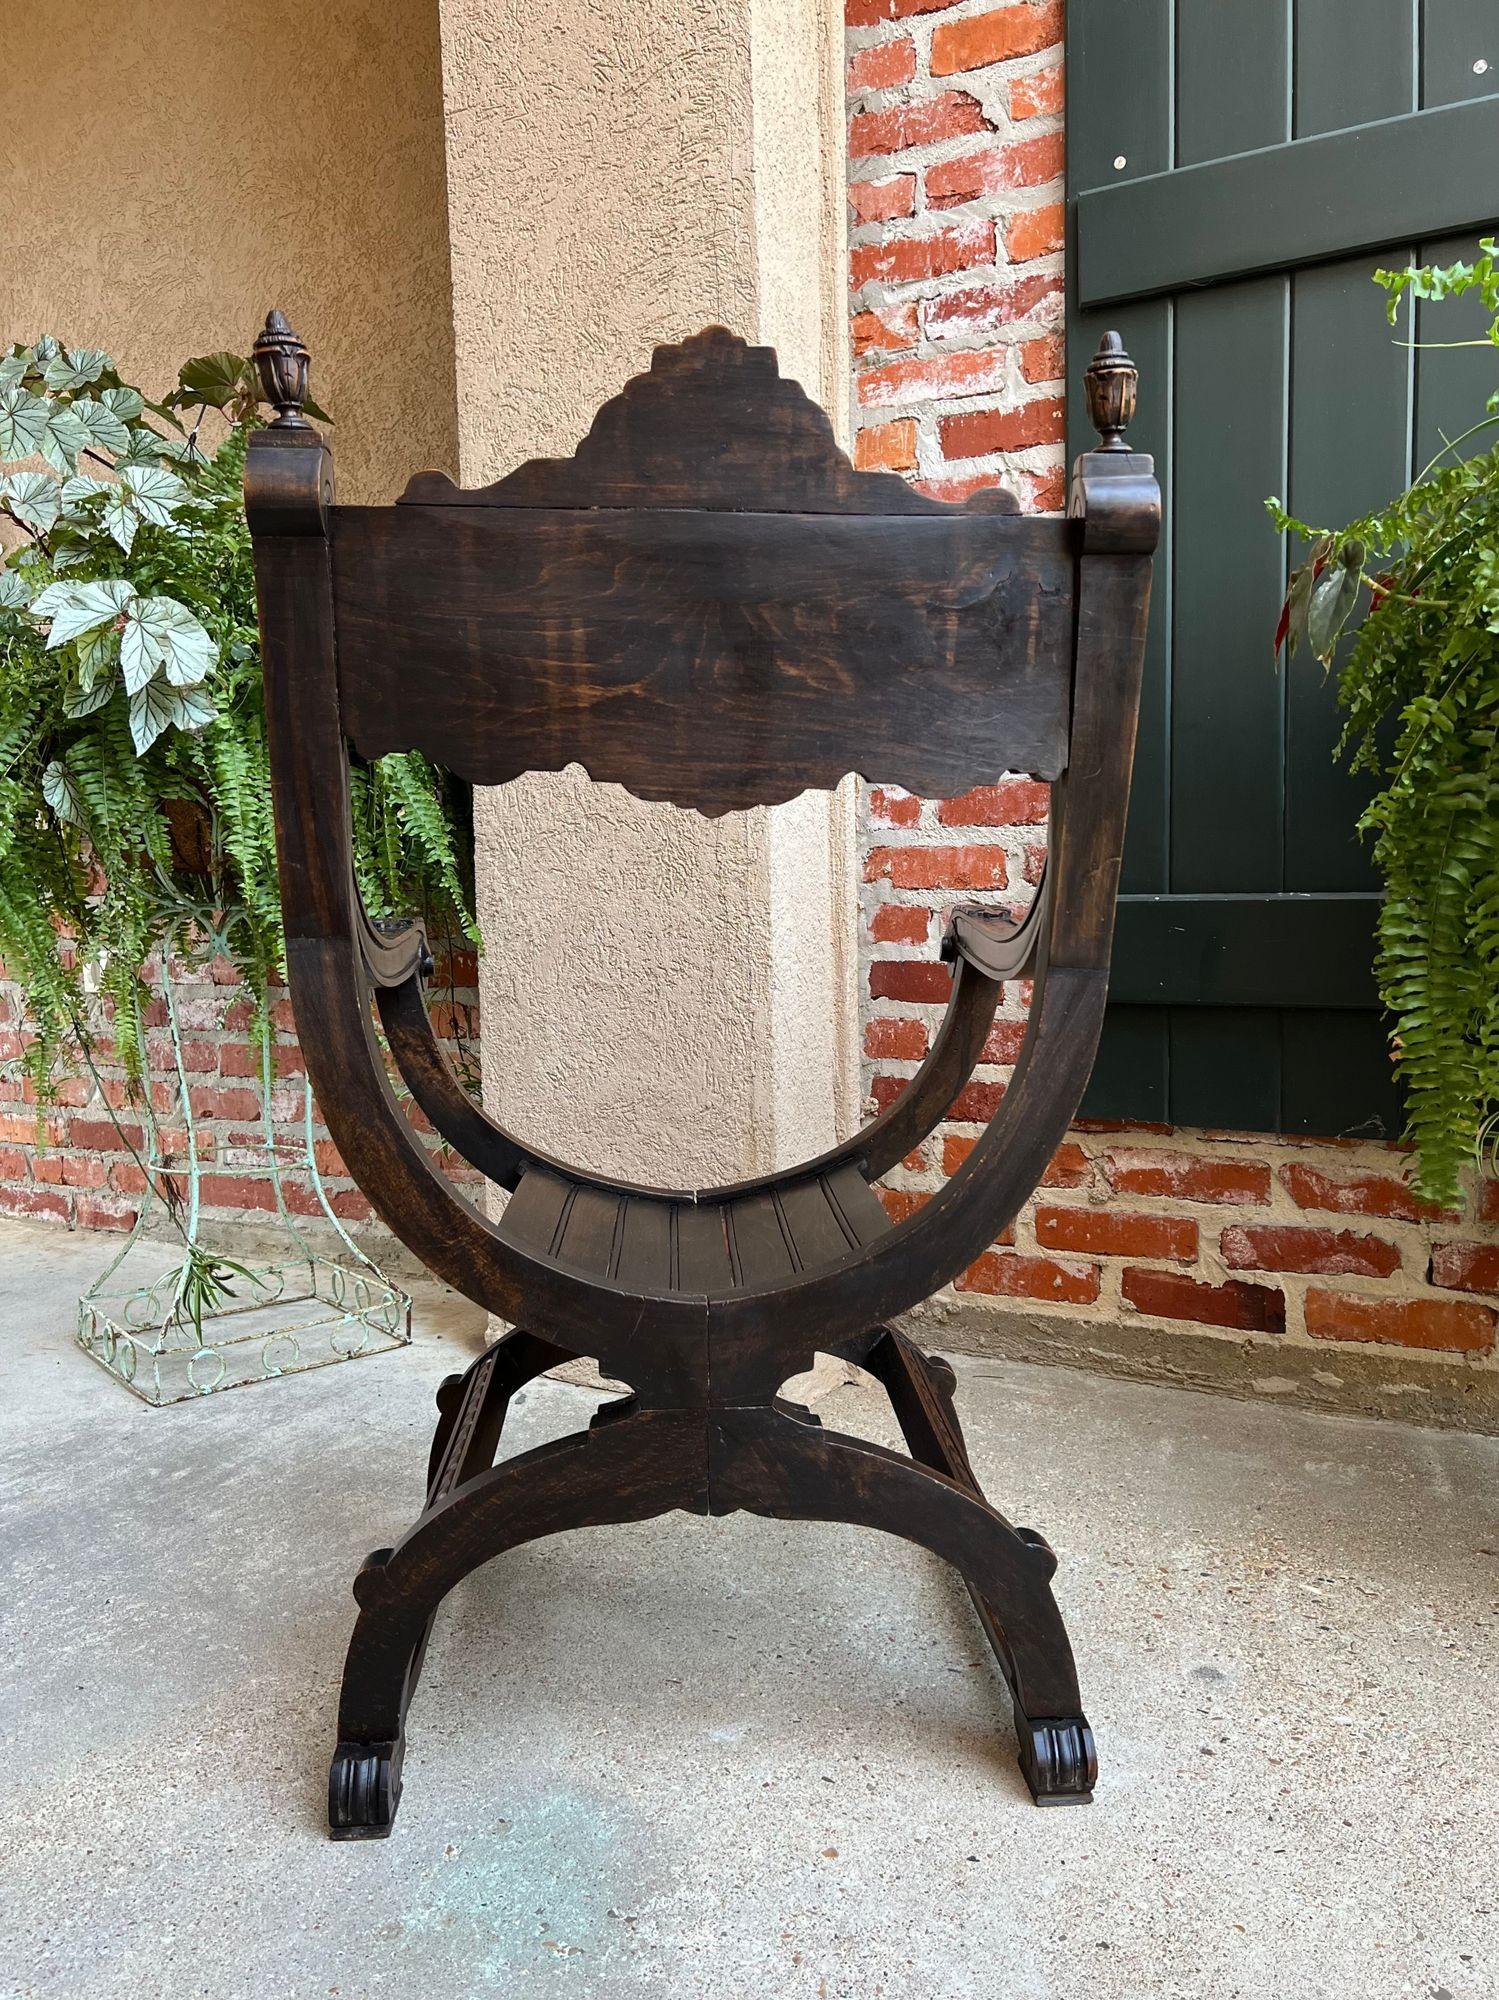 19th Century French Dagobert arm chair carved oak curule throne renaissance.
 
Direct from France, a highly carved antique “Dagobert” chair with beautifully detailed hand carvings from top to bottom.
Of course the “dagobert” throne chair or